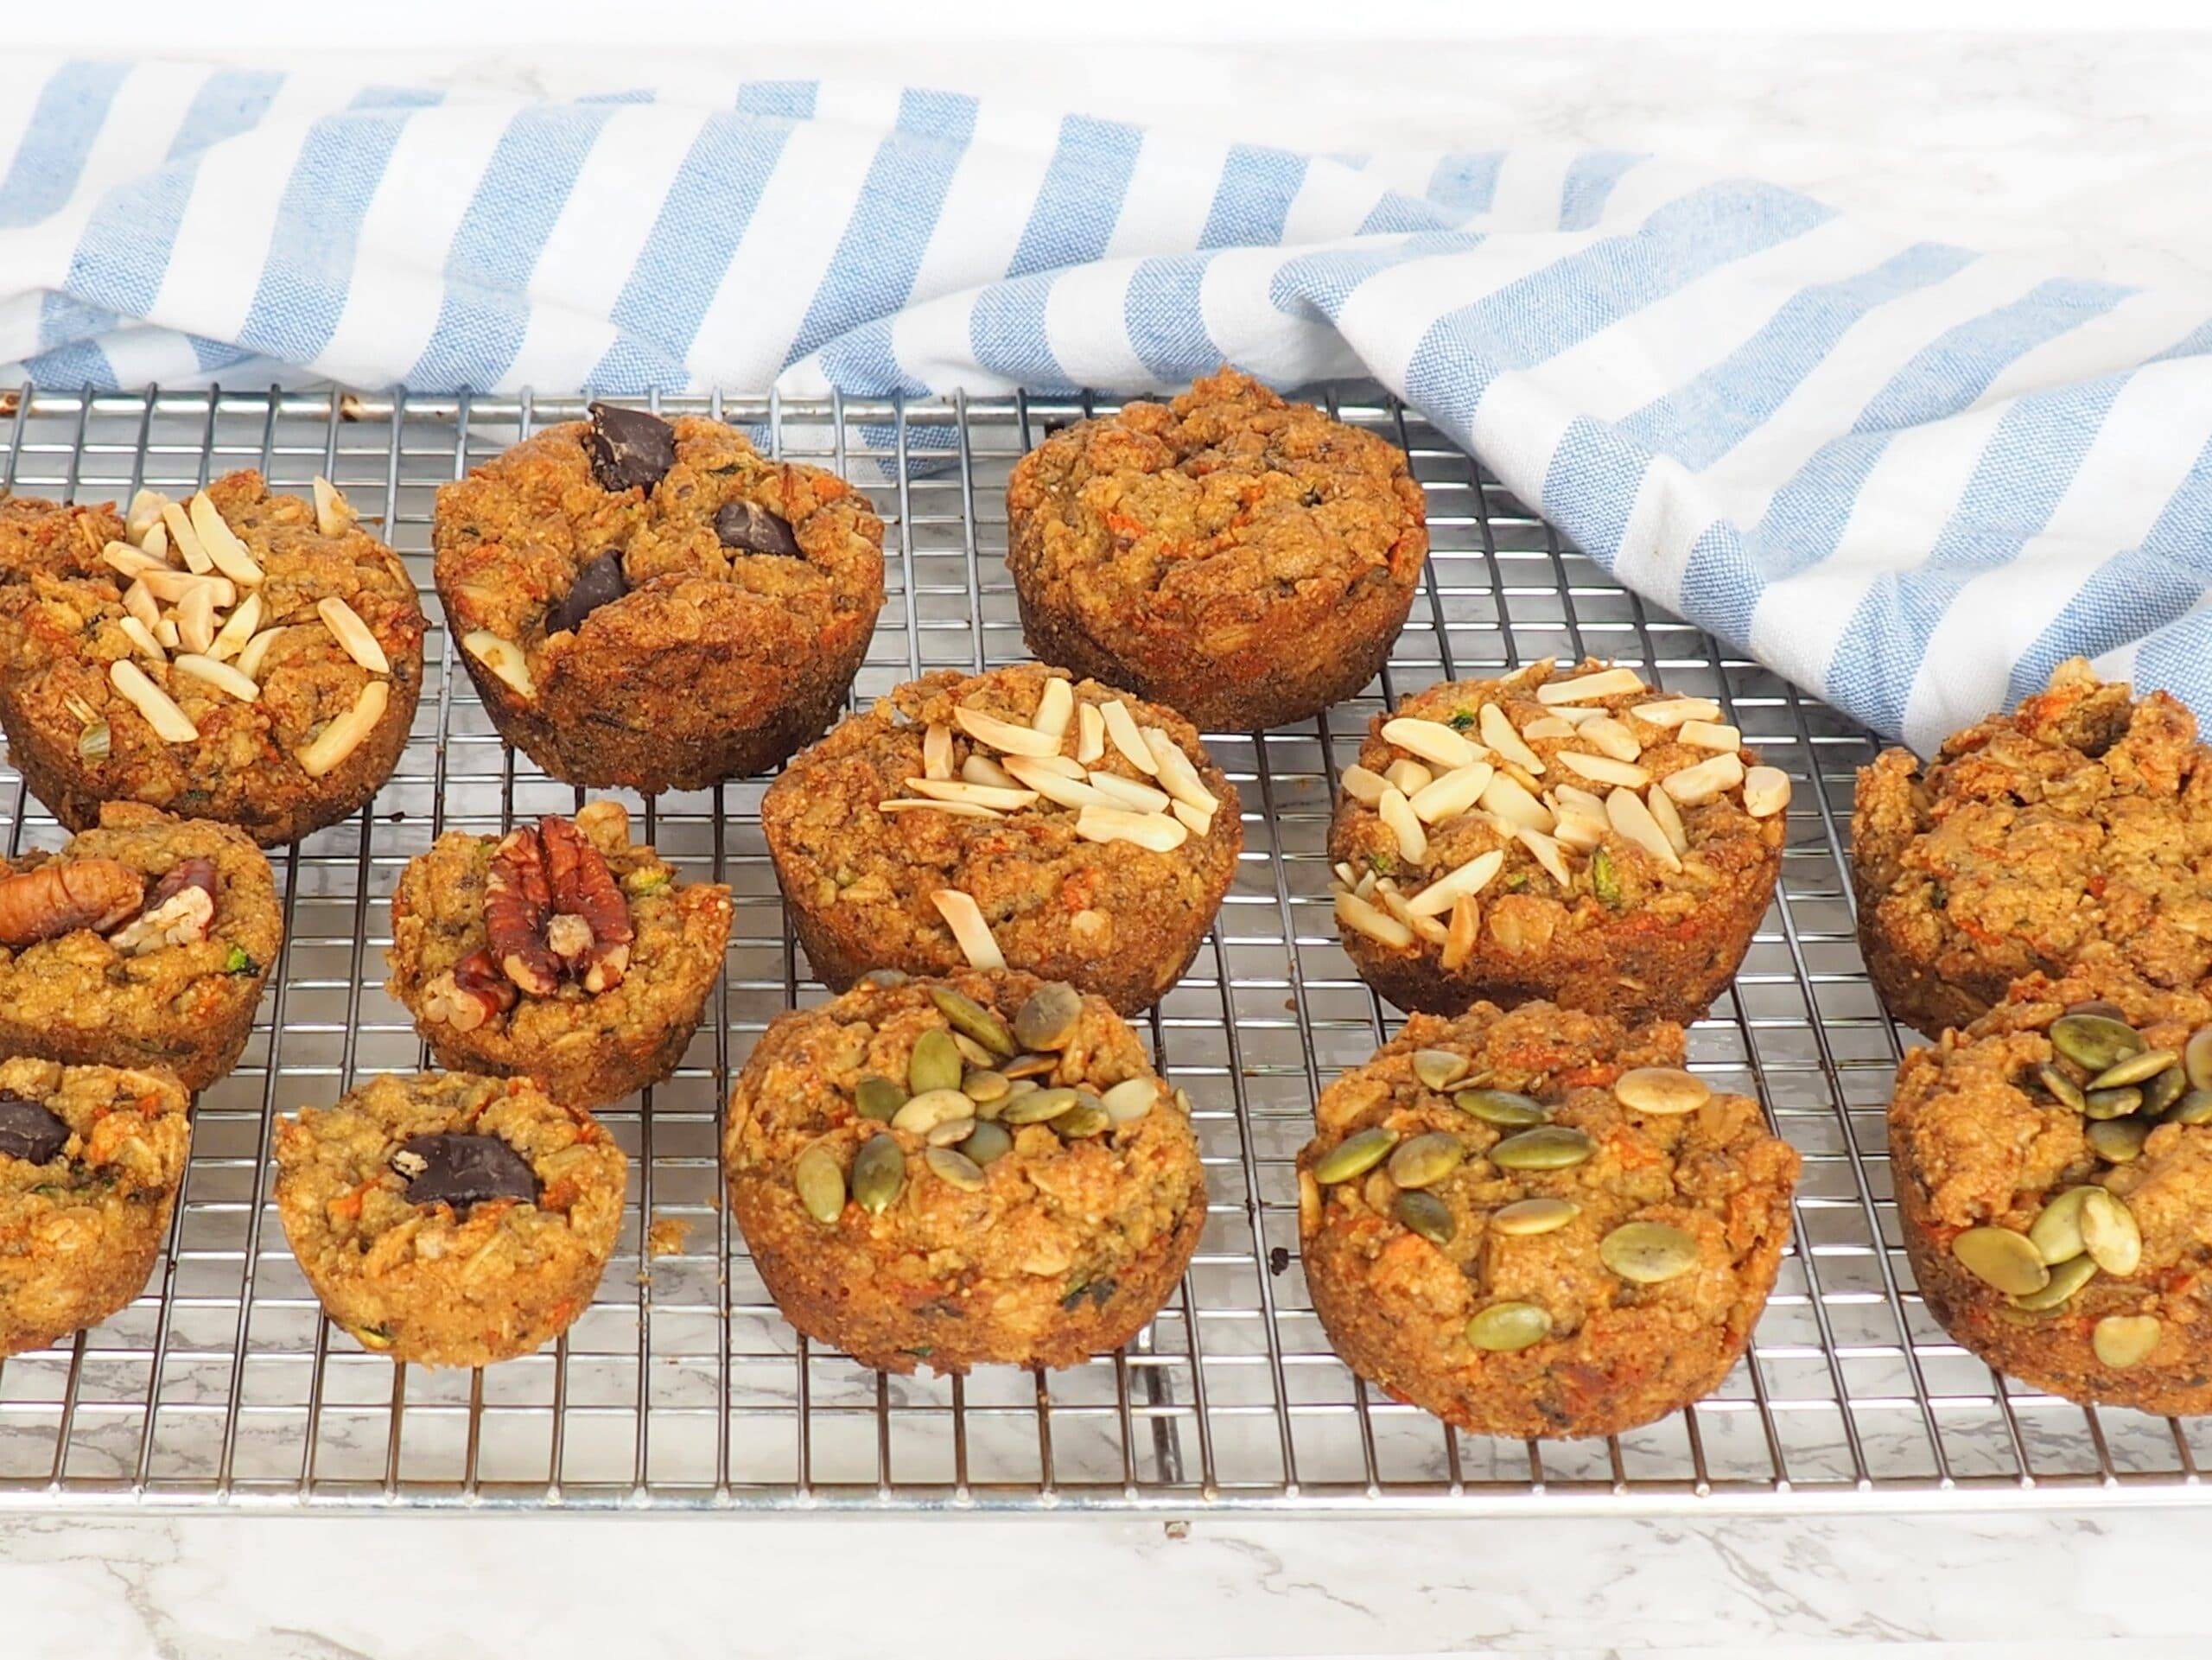 These cardamom zucchini muffins are vegan and gluten-free. Loved by kids and moms alike, they are perfect for pairing with your morning coffee or serving as an after-school snack.